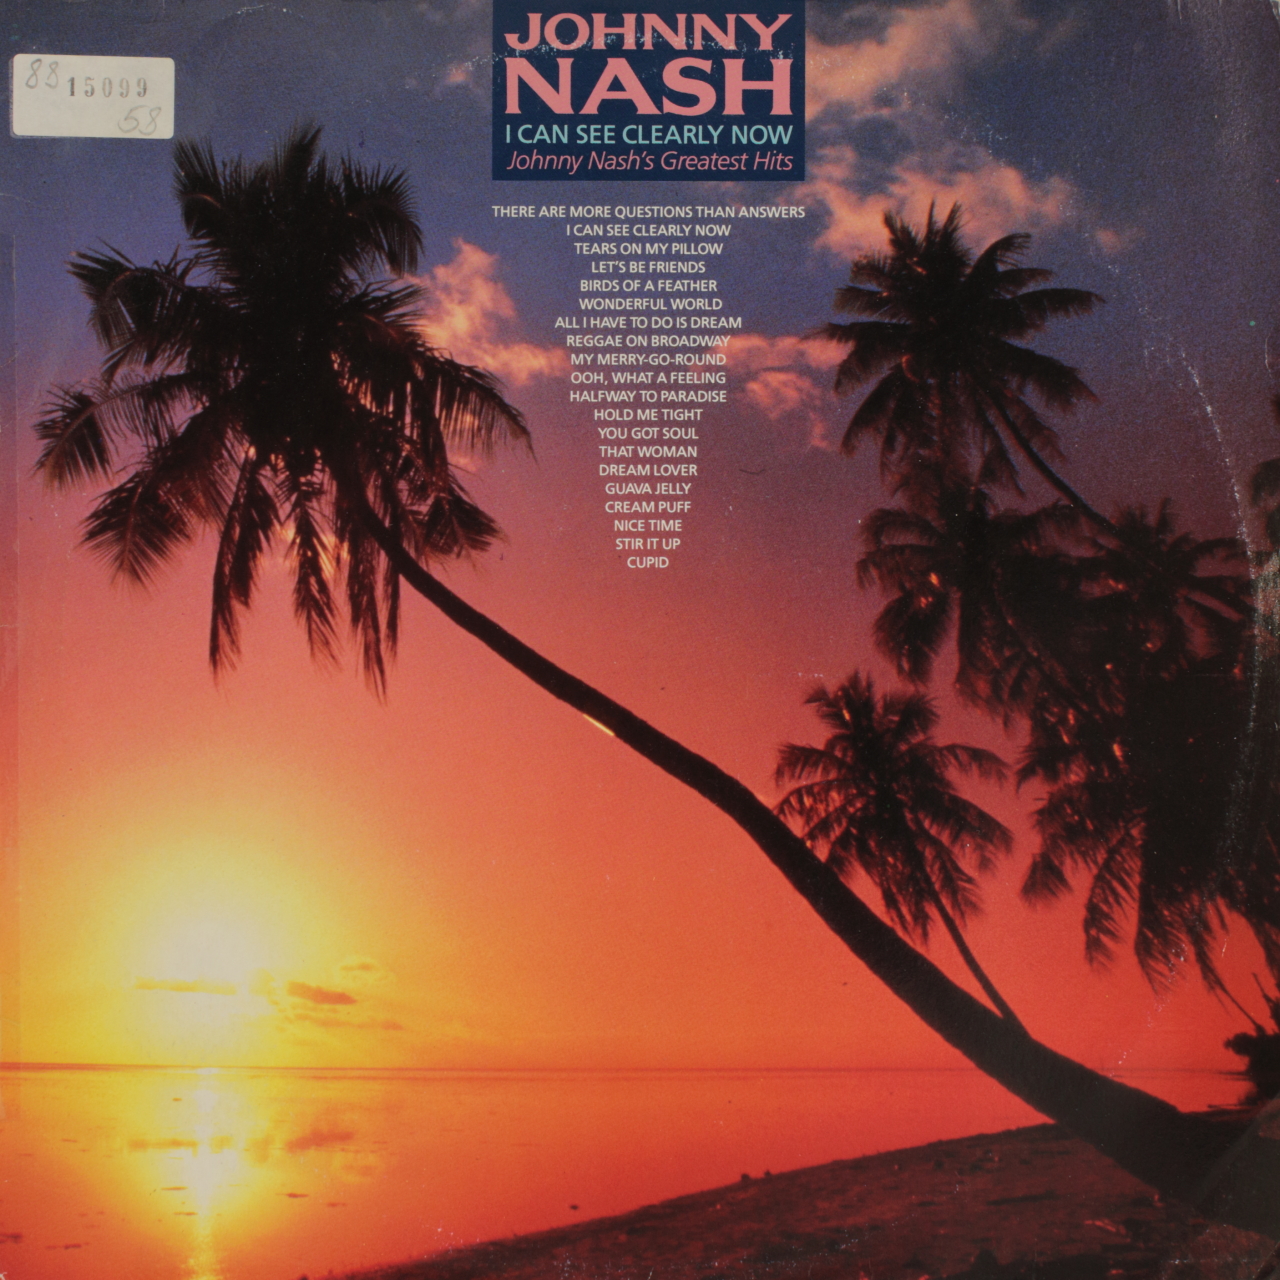 I Can See Clearly Now - Johnny Nash Greatest Hits